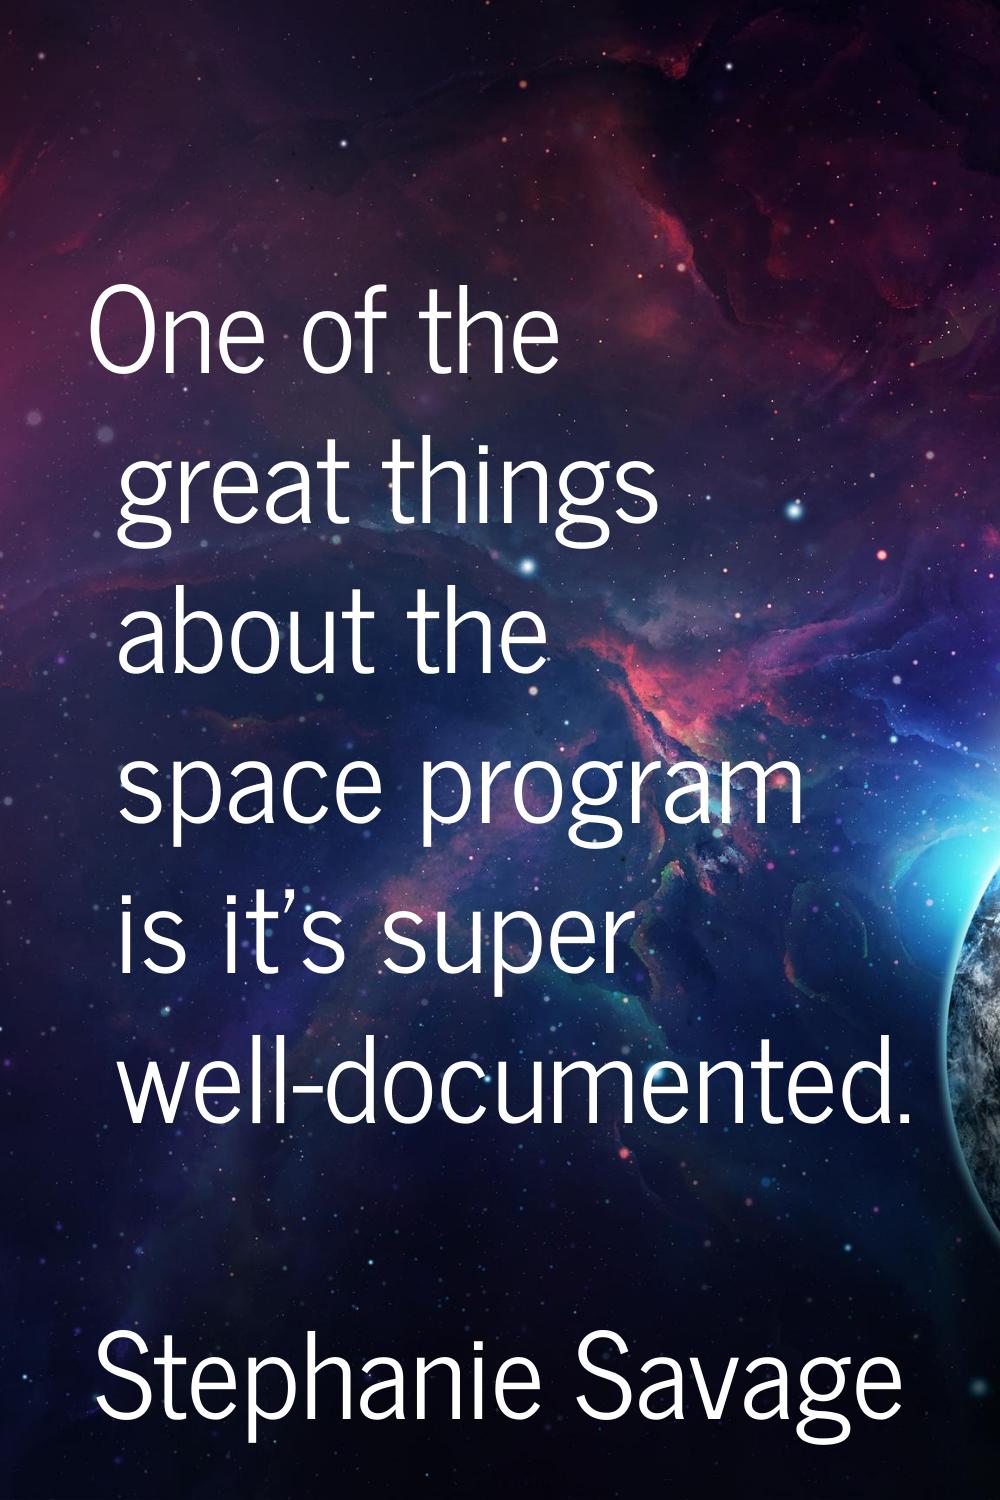 One of the great things about the space program is it's super well-documented.